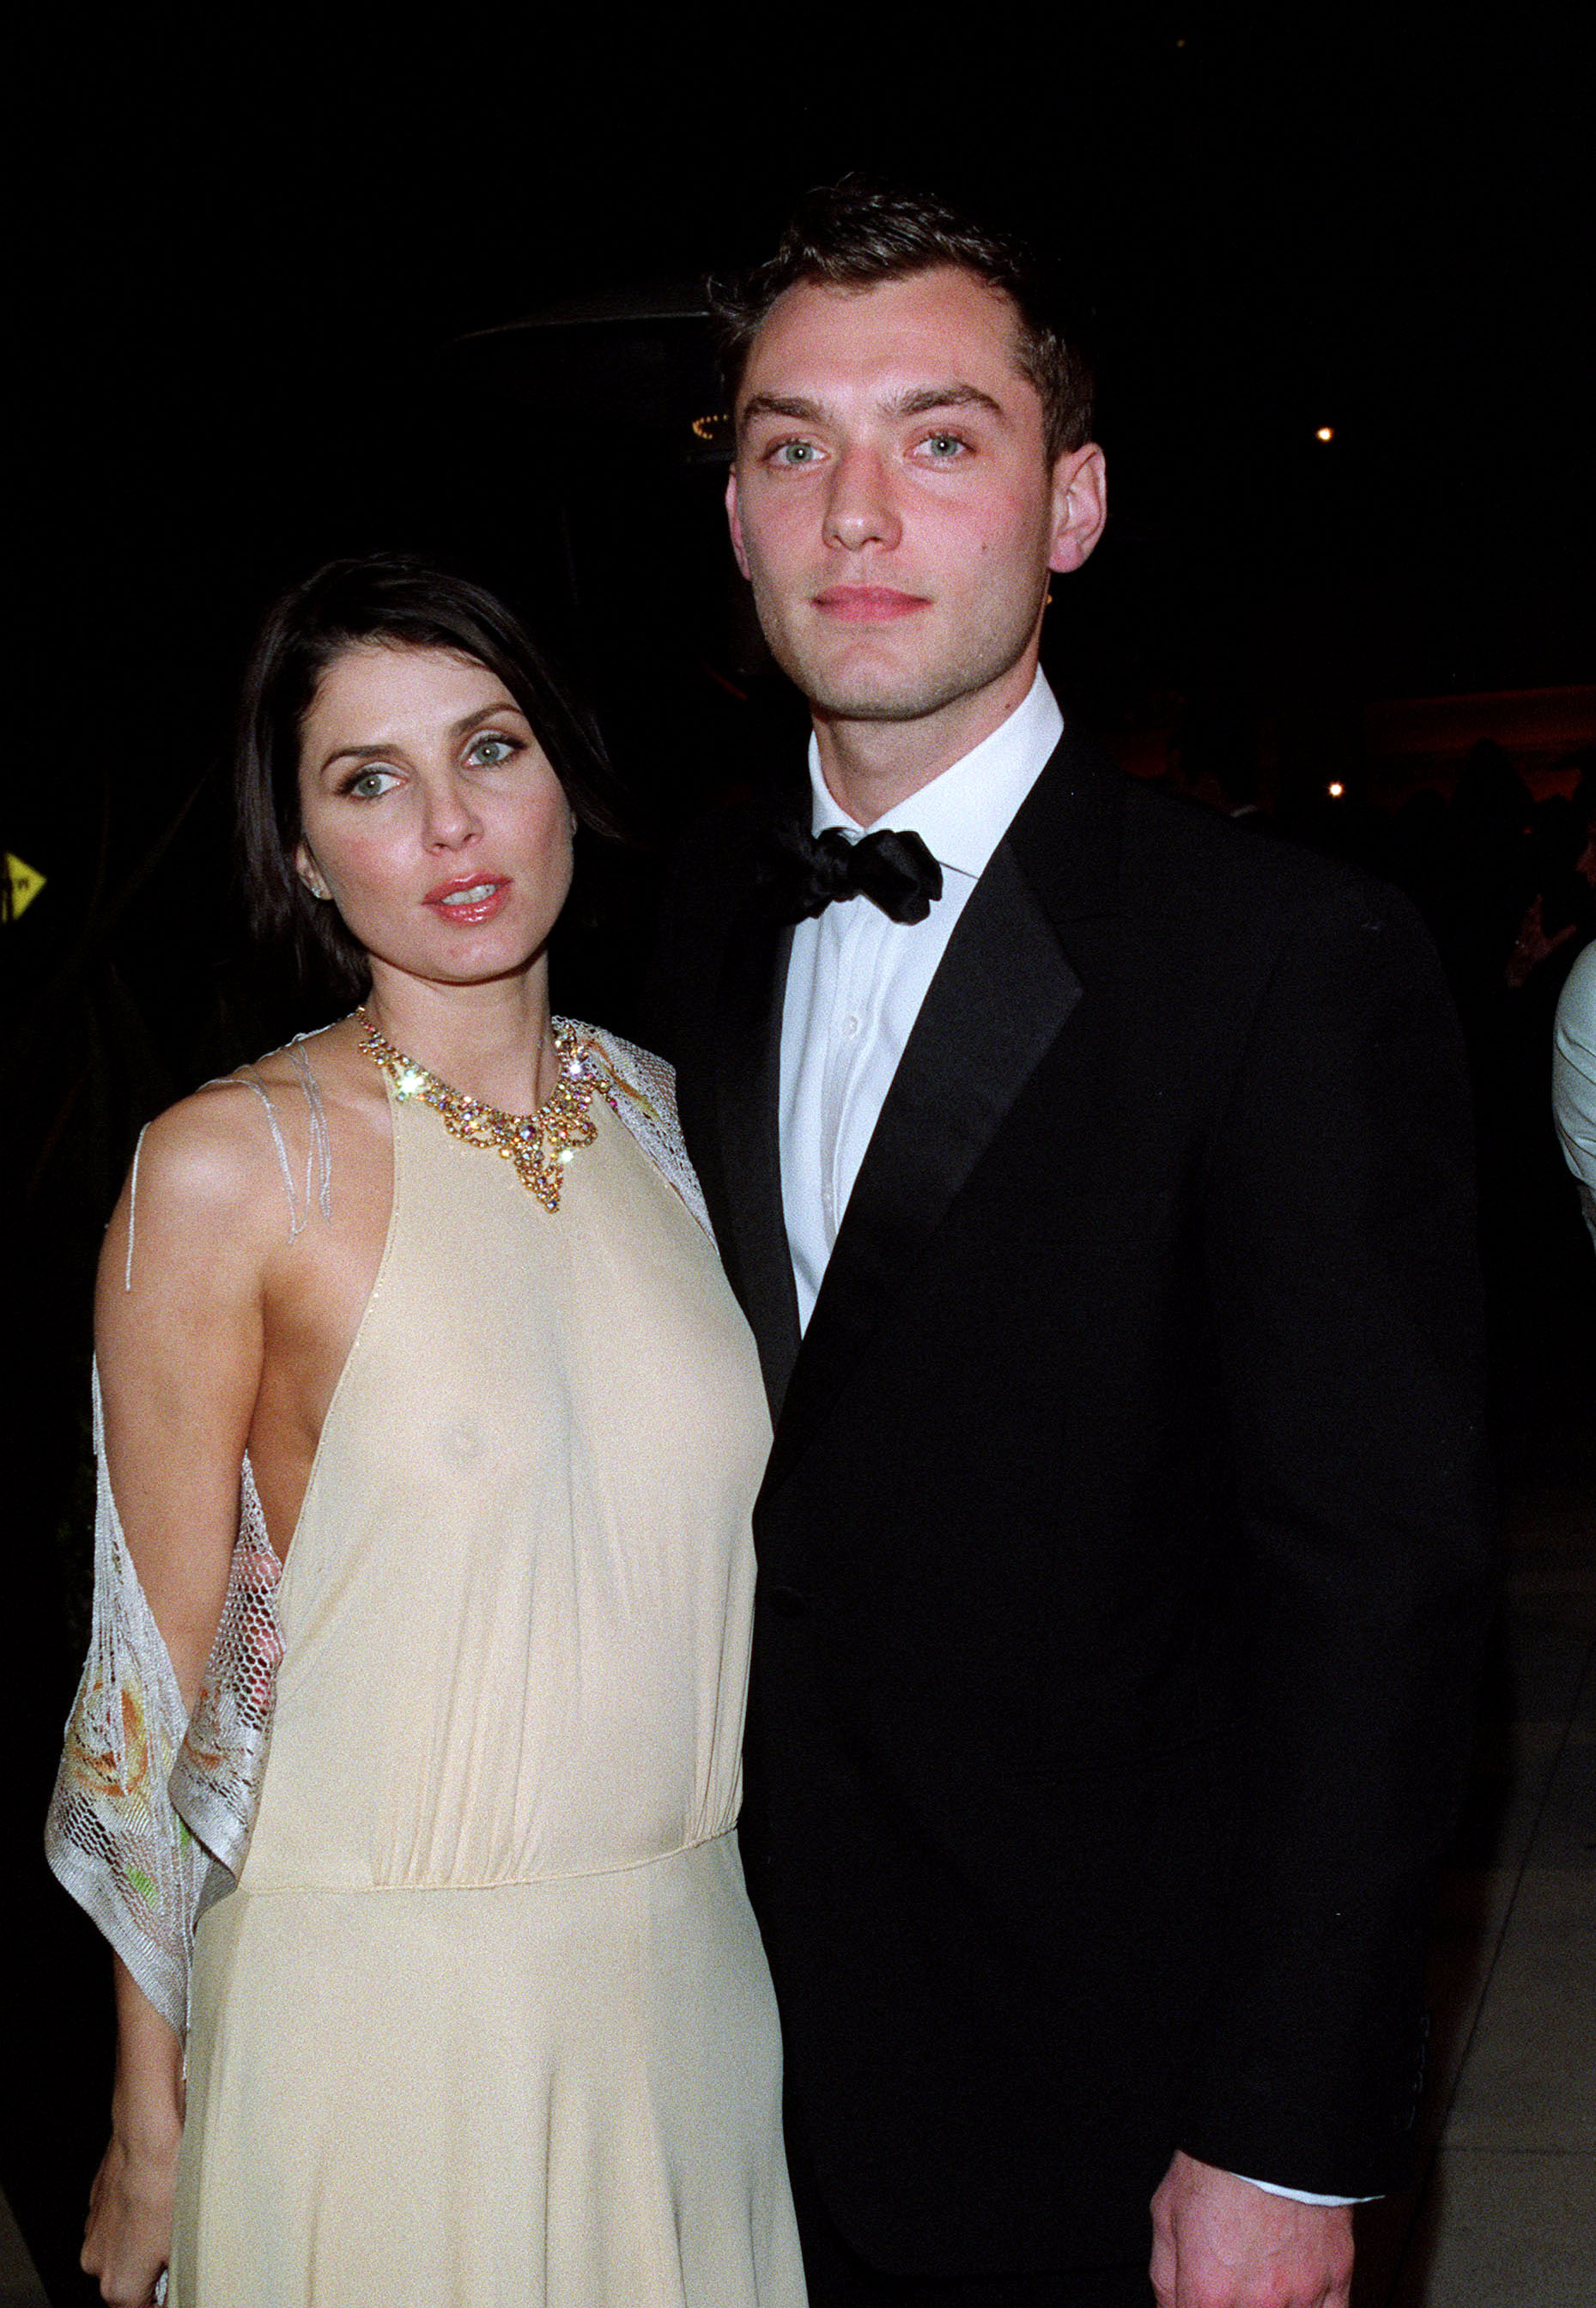 Jude Law and wife Sadie Frost at the Vanity Fair Party in California in 2003 | Source: Getty Images